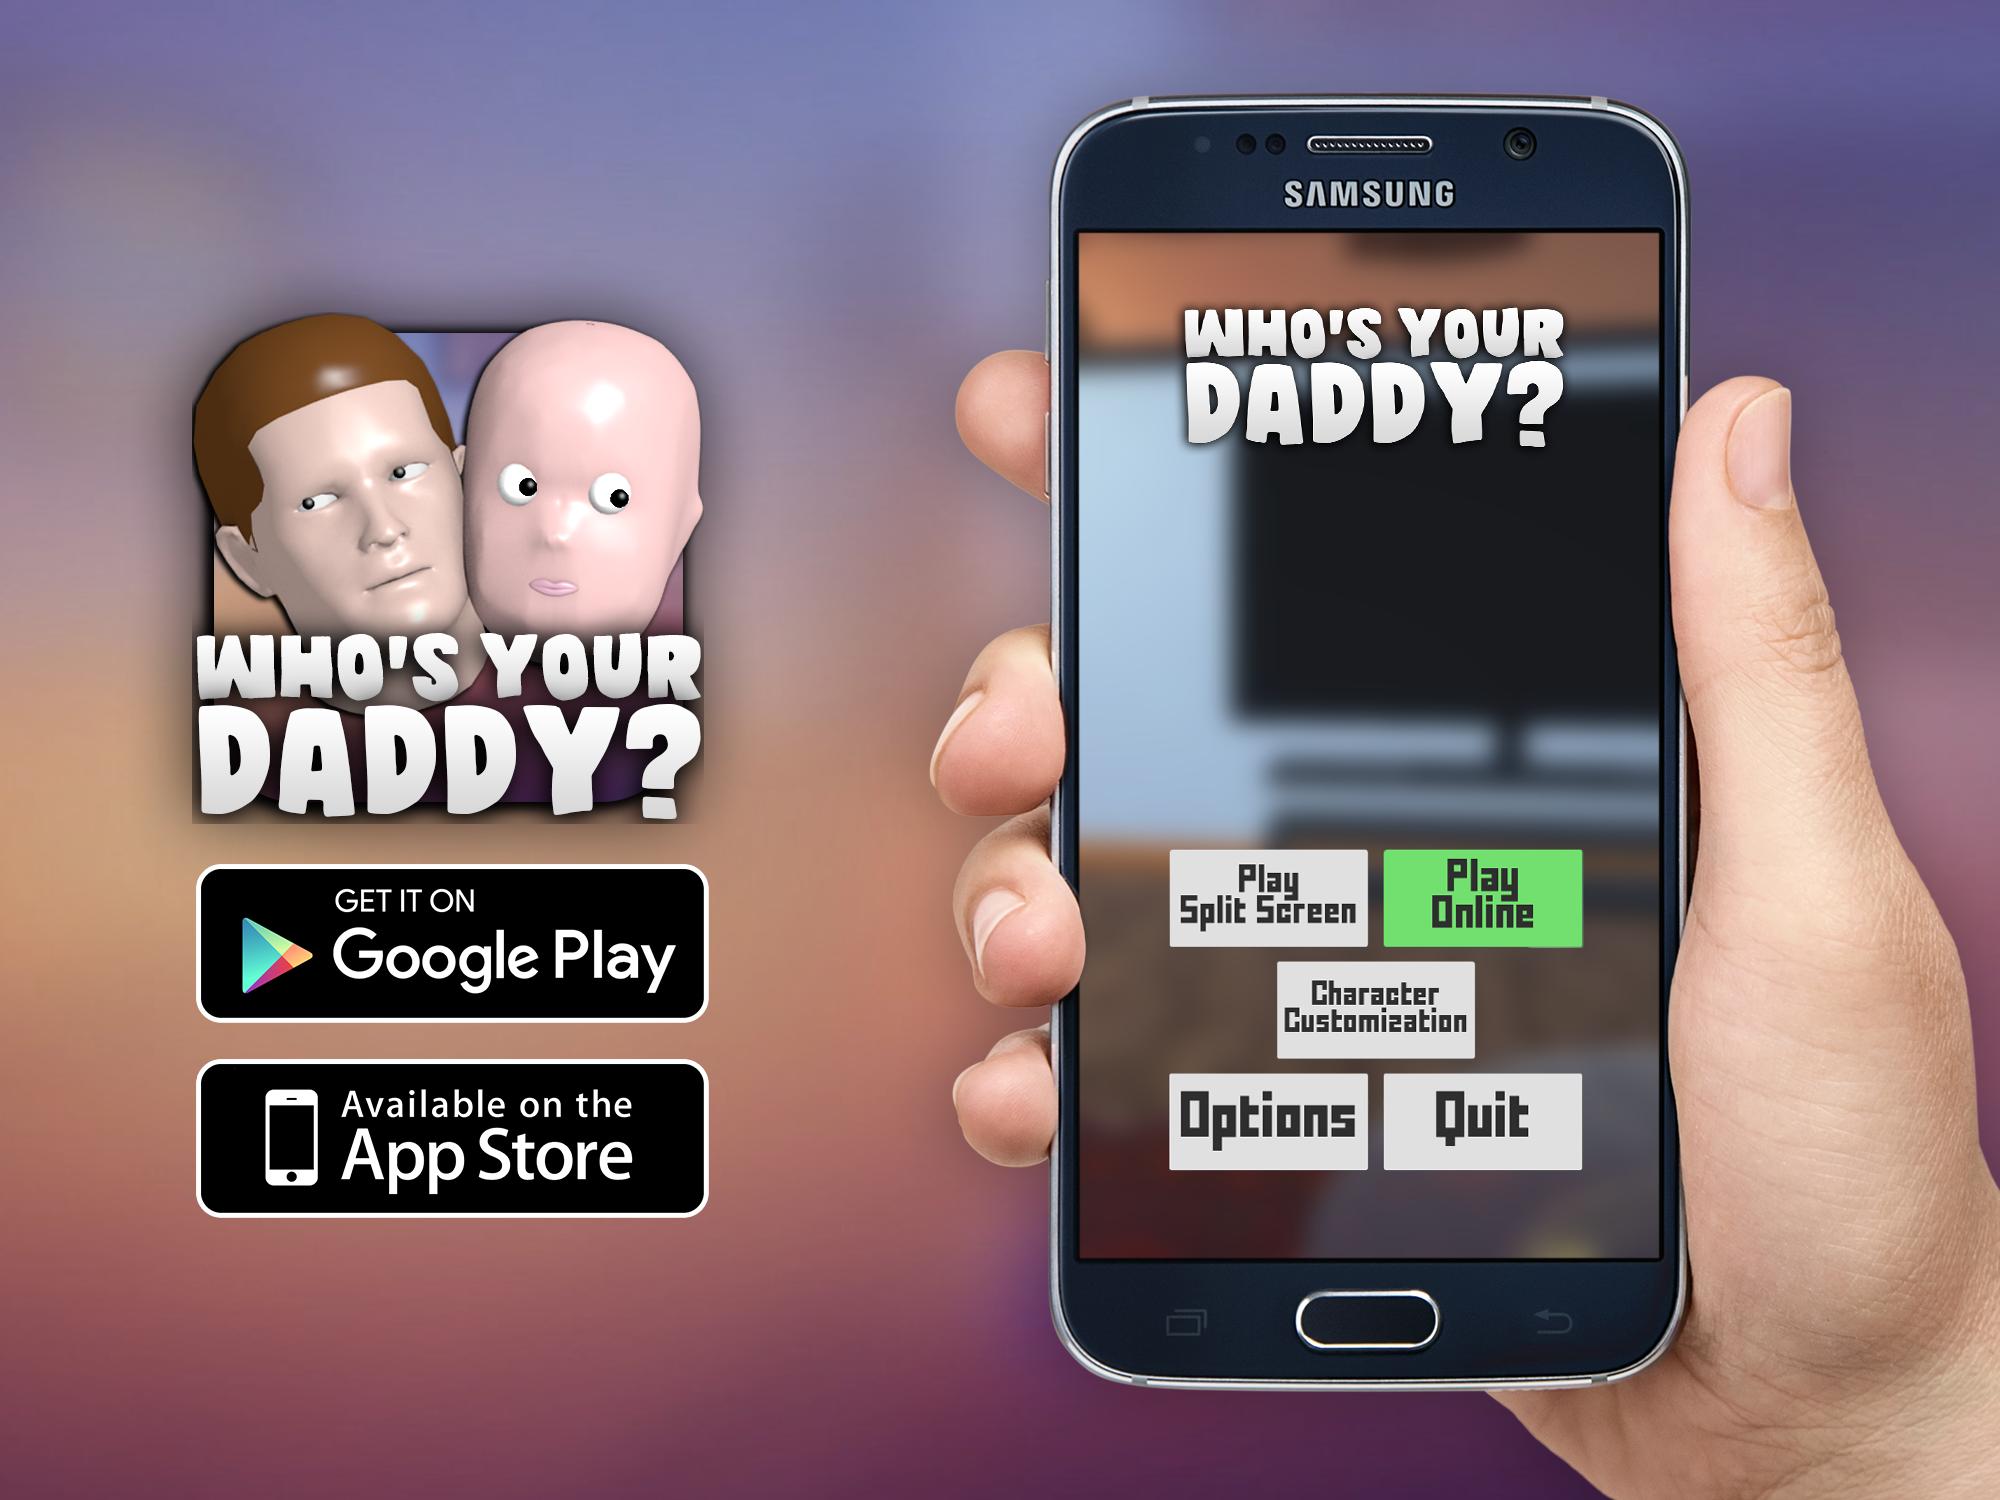 Daddy android. Who is your Daddy игра. Whos your Daddy на андроид. Who s your Daddy Android. Who's your Daddy на двоих.